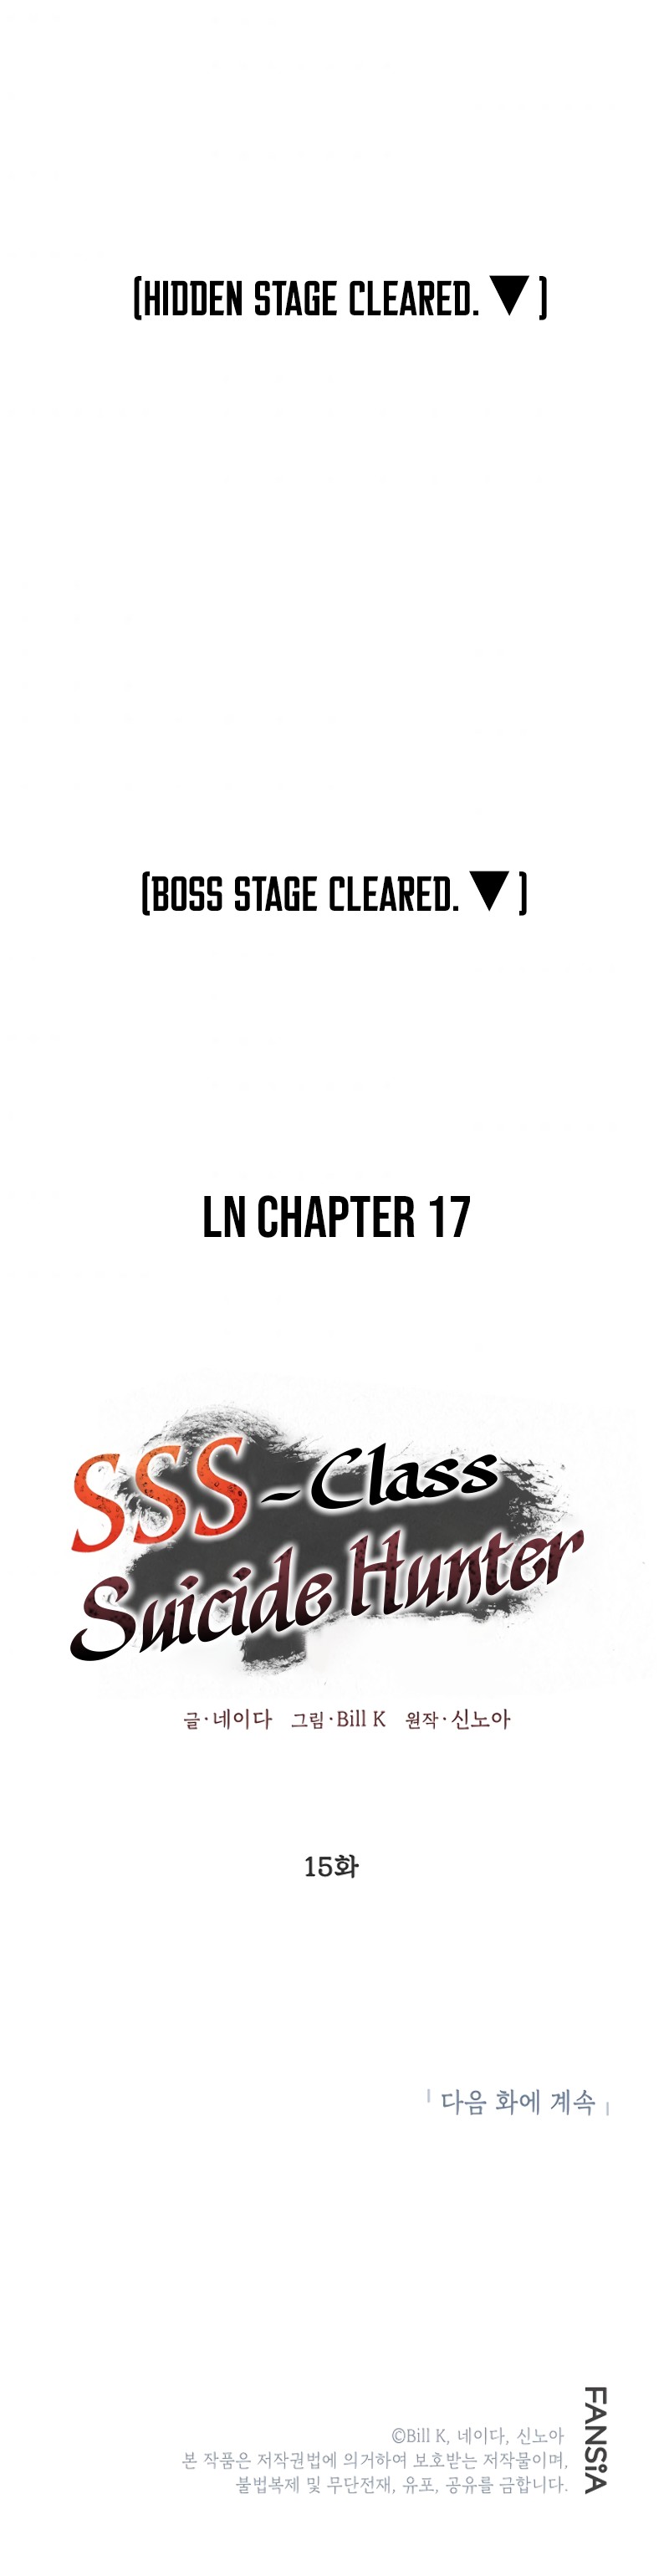 SSS-Class Suicide Hunter image